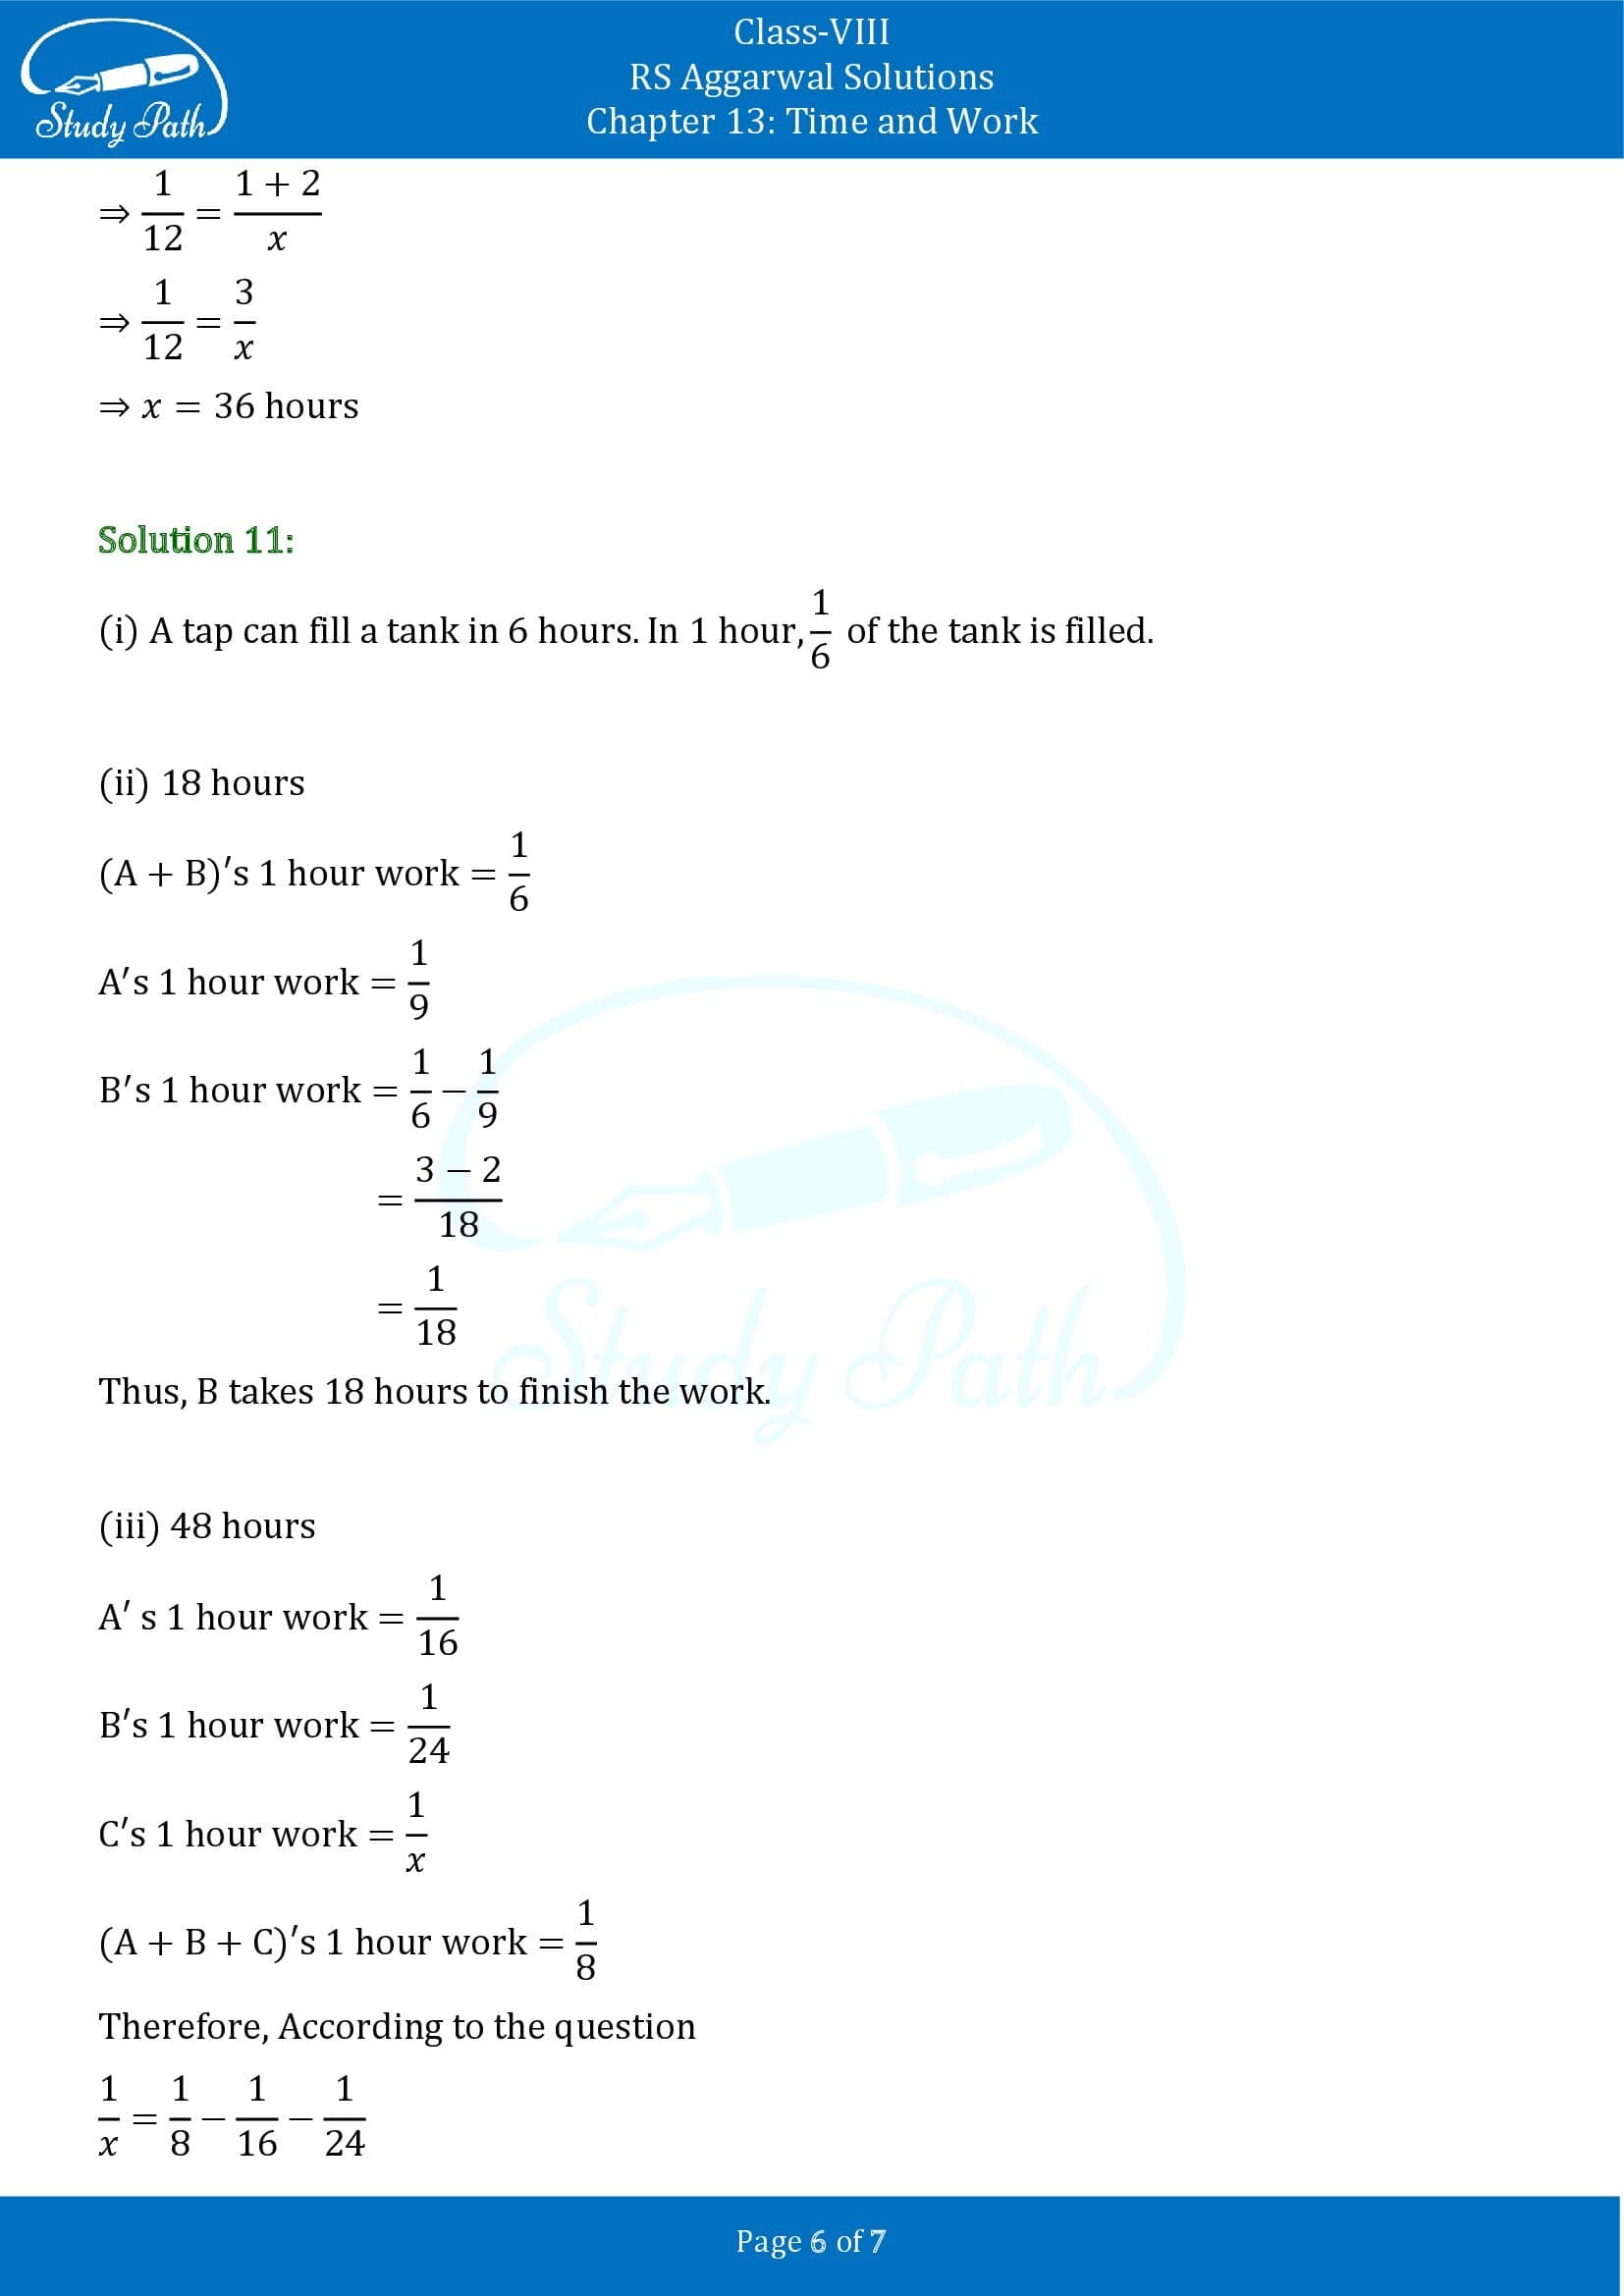 RS Aggarwal Solutions Class 8 Chapter 13 Time and Work Test Paper 00006